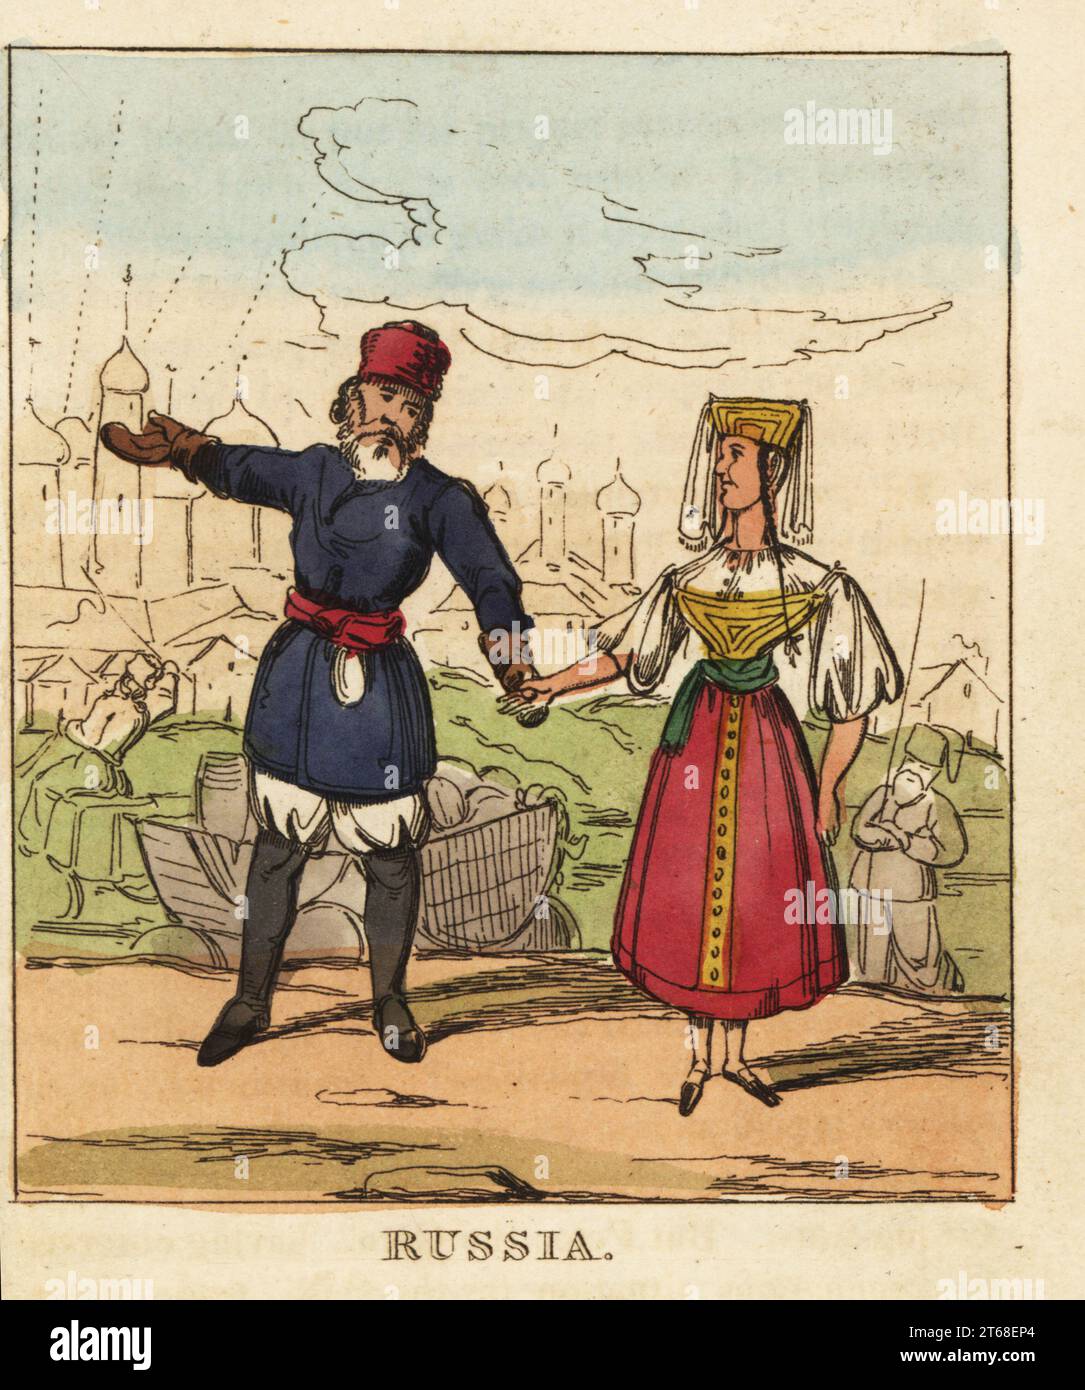 Costumes of Russia, 19th century. Russian man in hat, coat, sash belt, gloves, breeches and boots. Woman in square hat with veil, blouse, bodice, apron and skirts. Handcoloured copperplate engraving from The World in Miniature, or Panorama of the Costumes, Manners & Customs of All Nations, John Bysh, London, 1825. Stock Photo